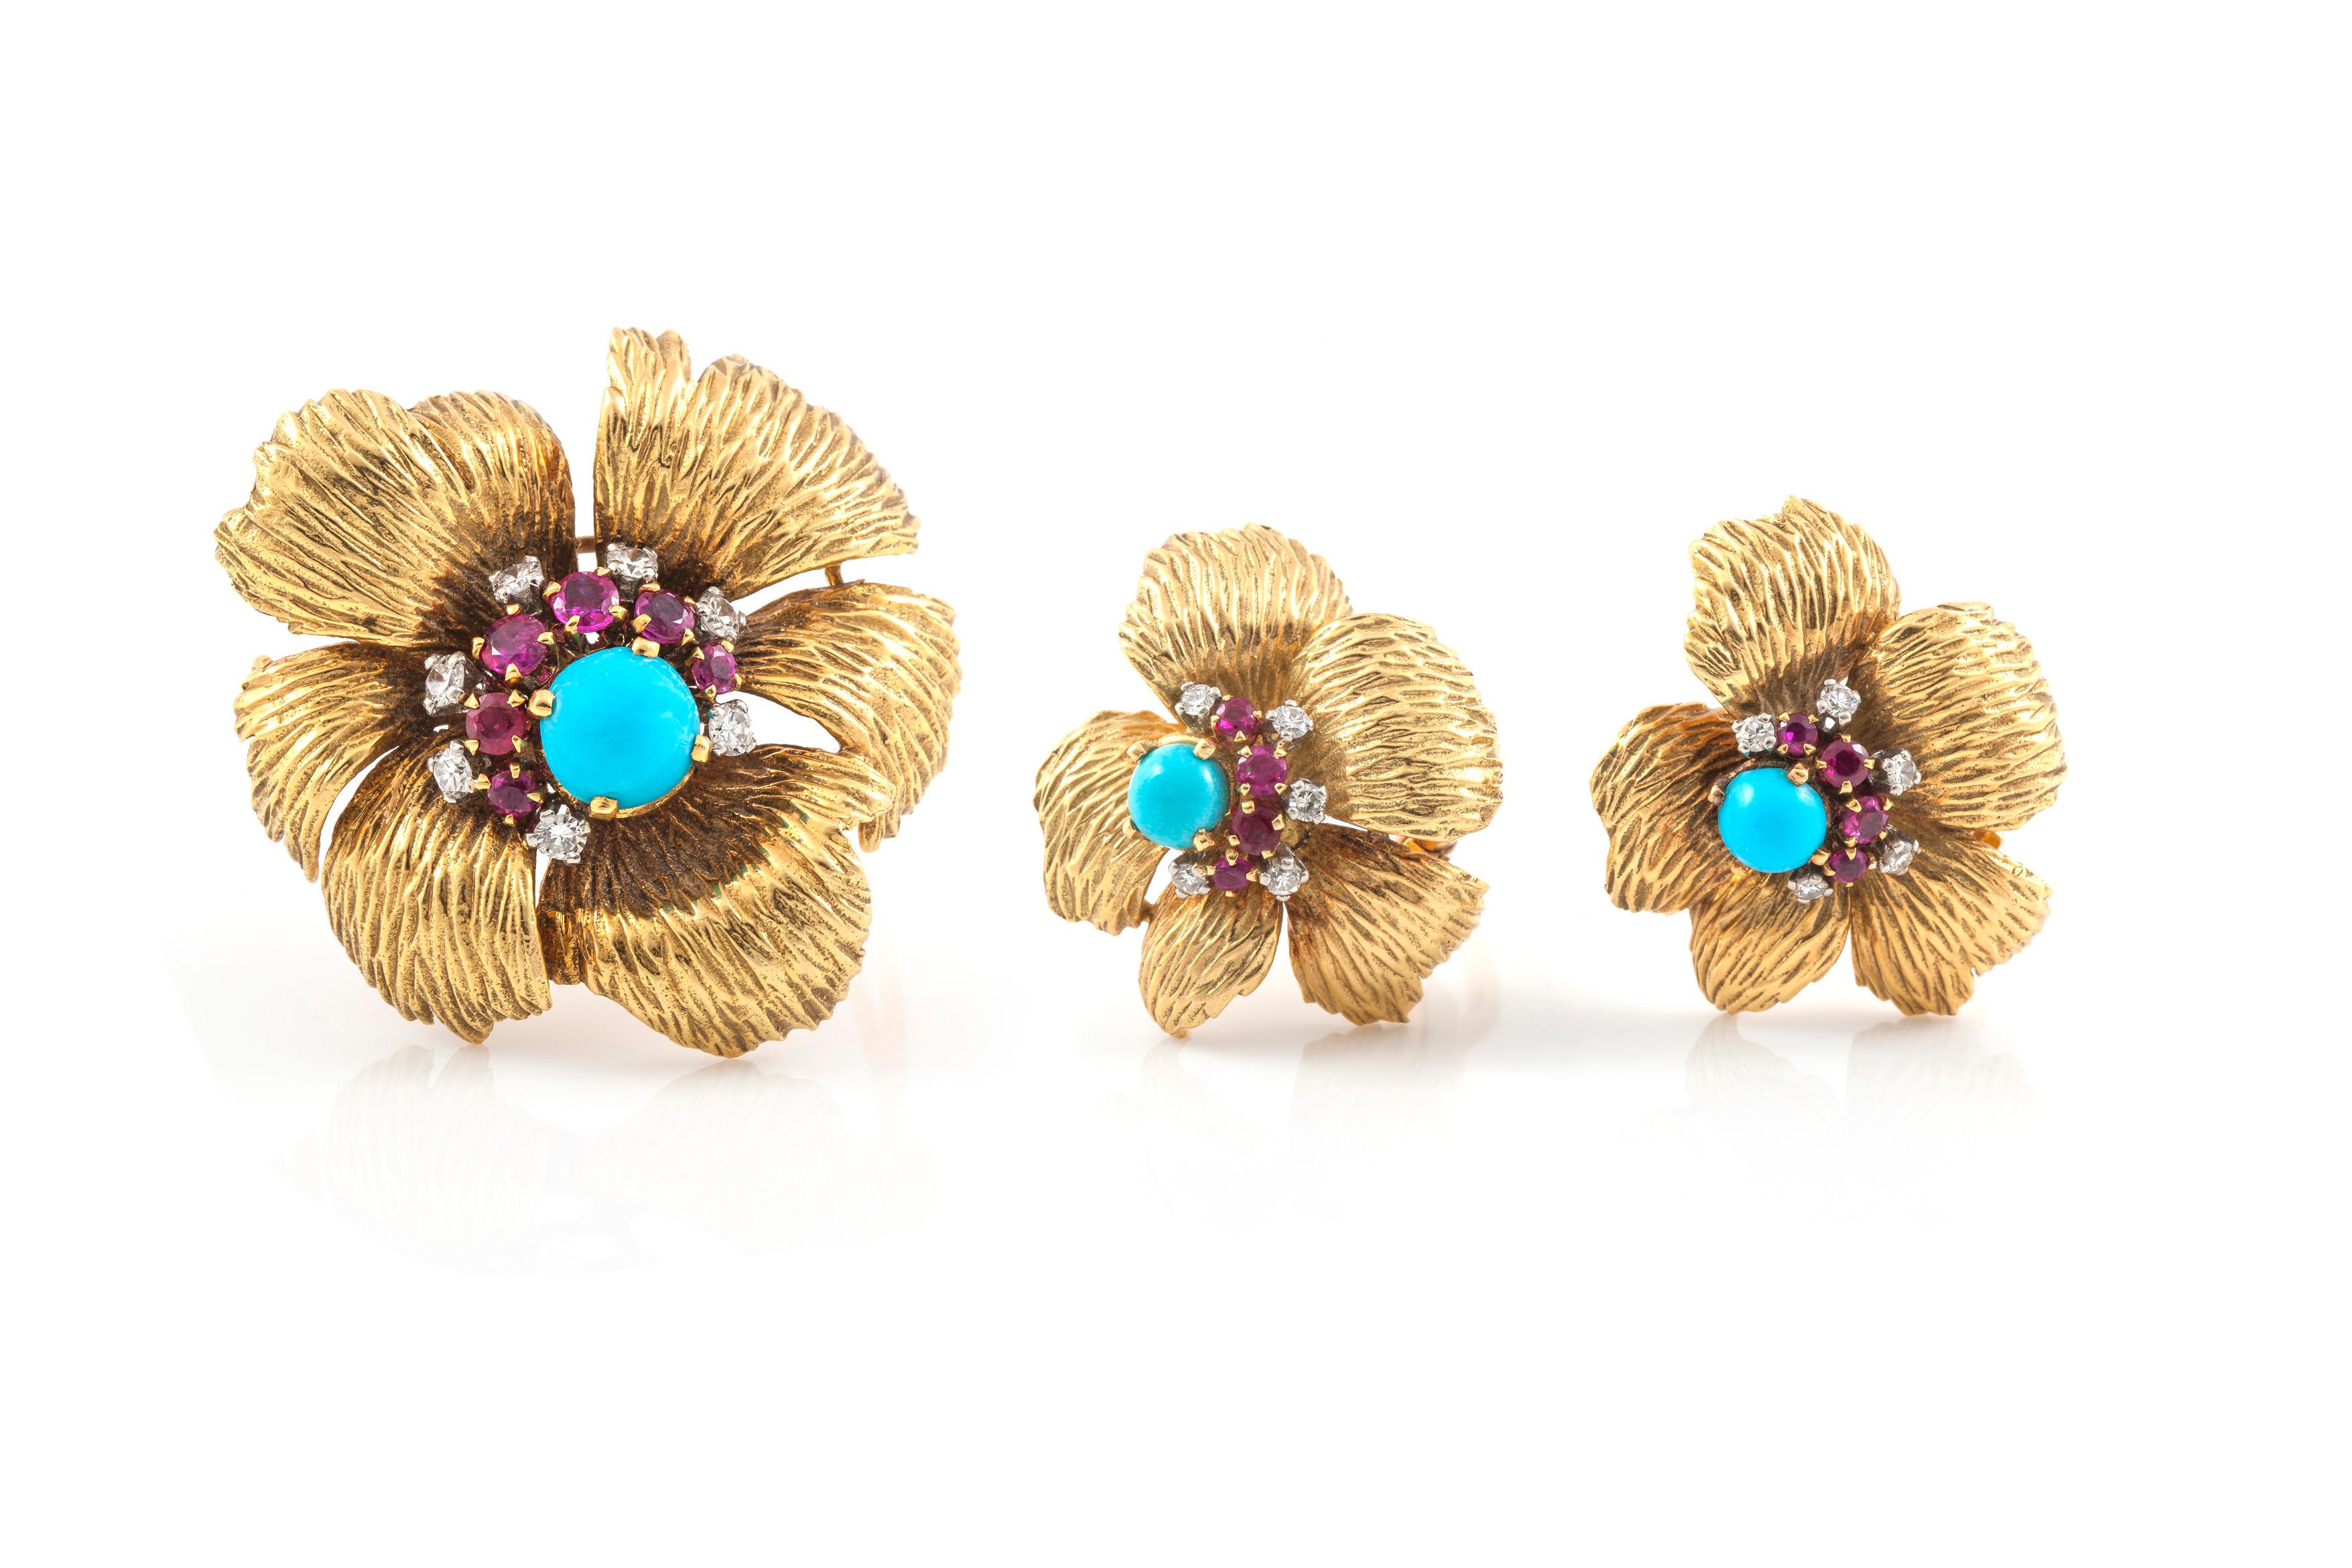 Mauboussin 18K Flower earrings accompanied by 5 small diamonds, 4 rubies and a hint of turquosie at the center.  
Mauboussin 18K Flower Brooch accompanied by 7 small diamonds, 6 rubies and a hint of turquosie at the center.